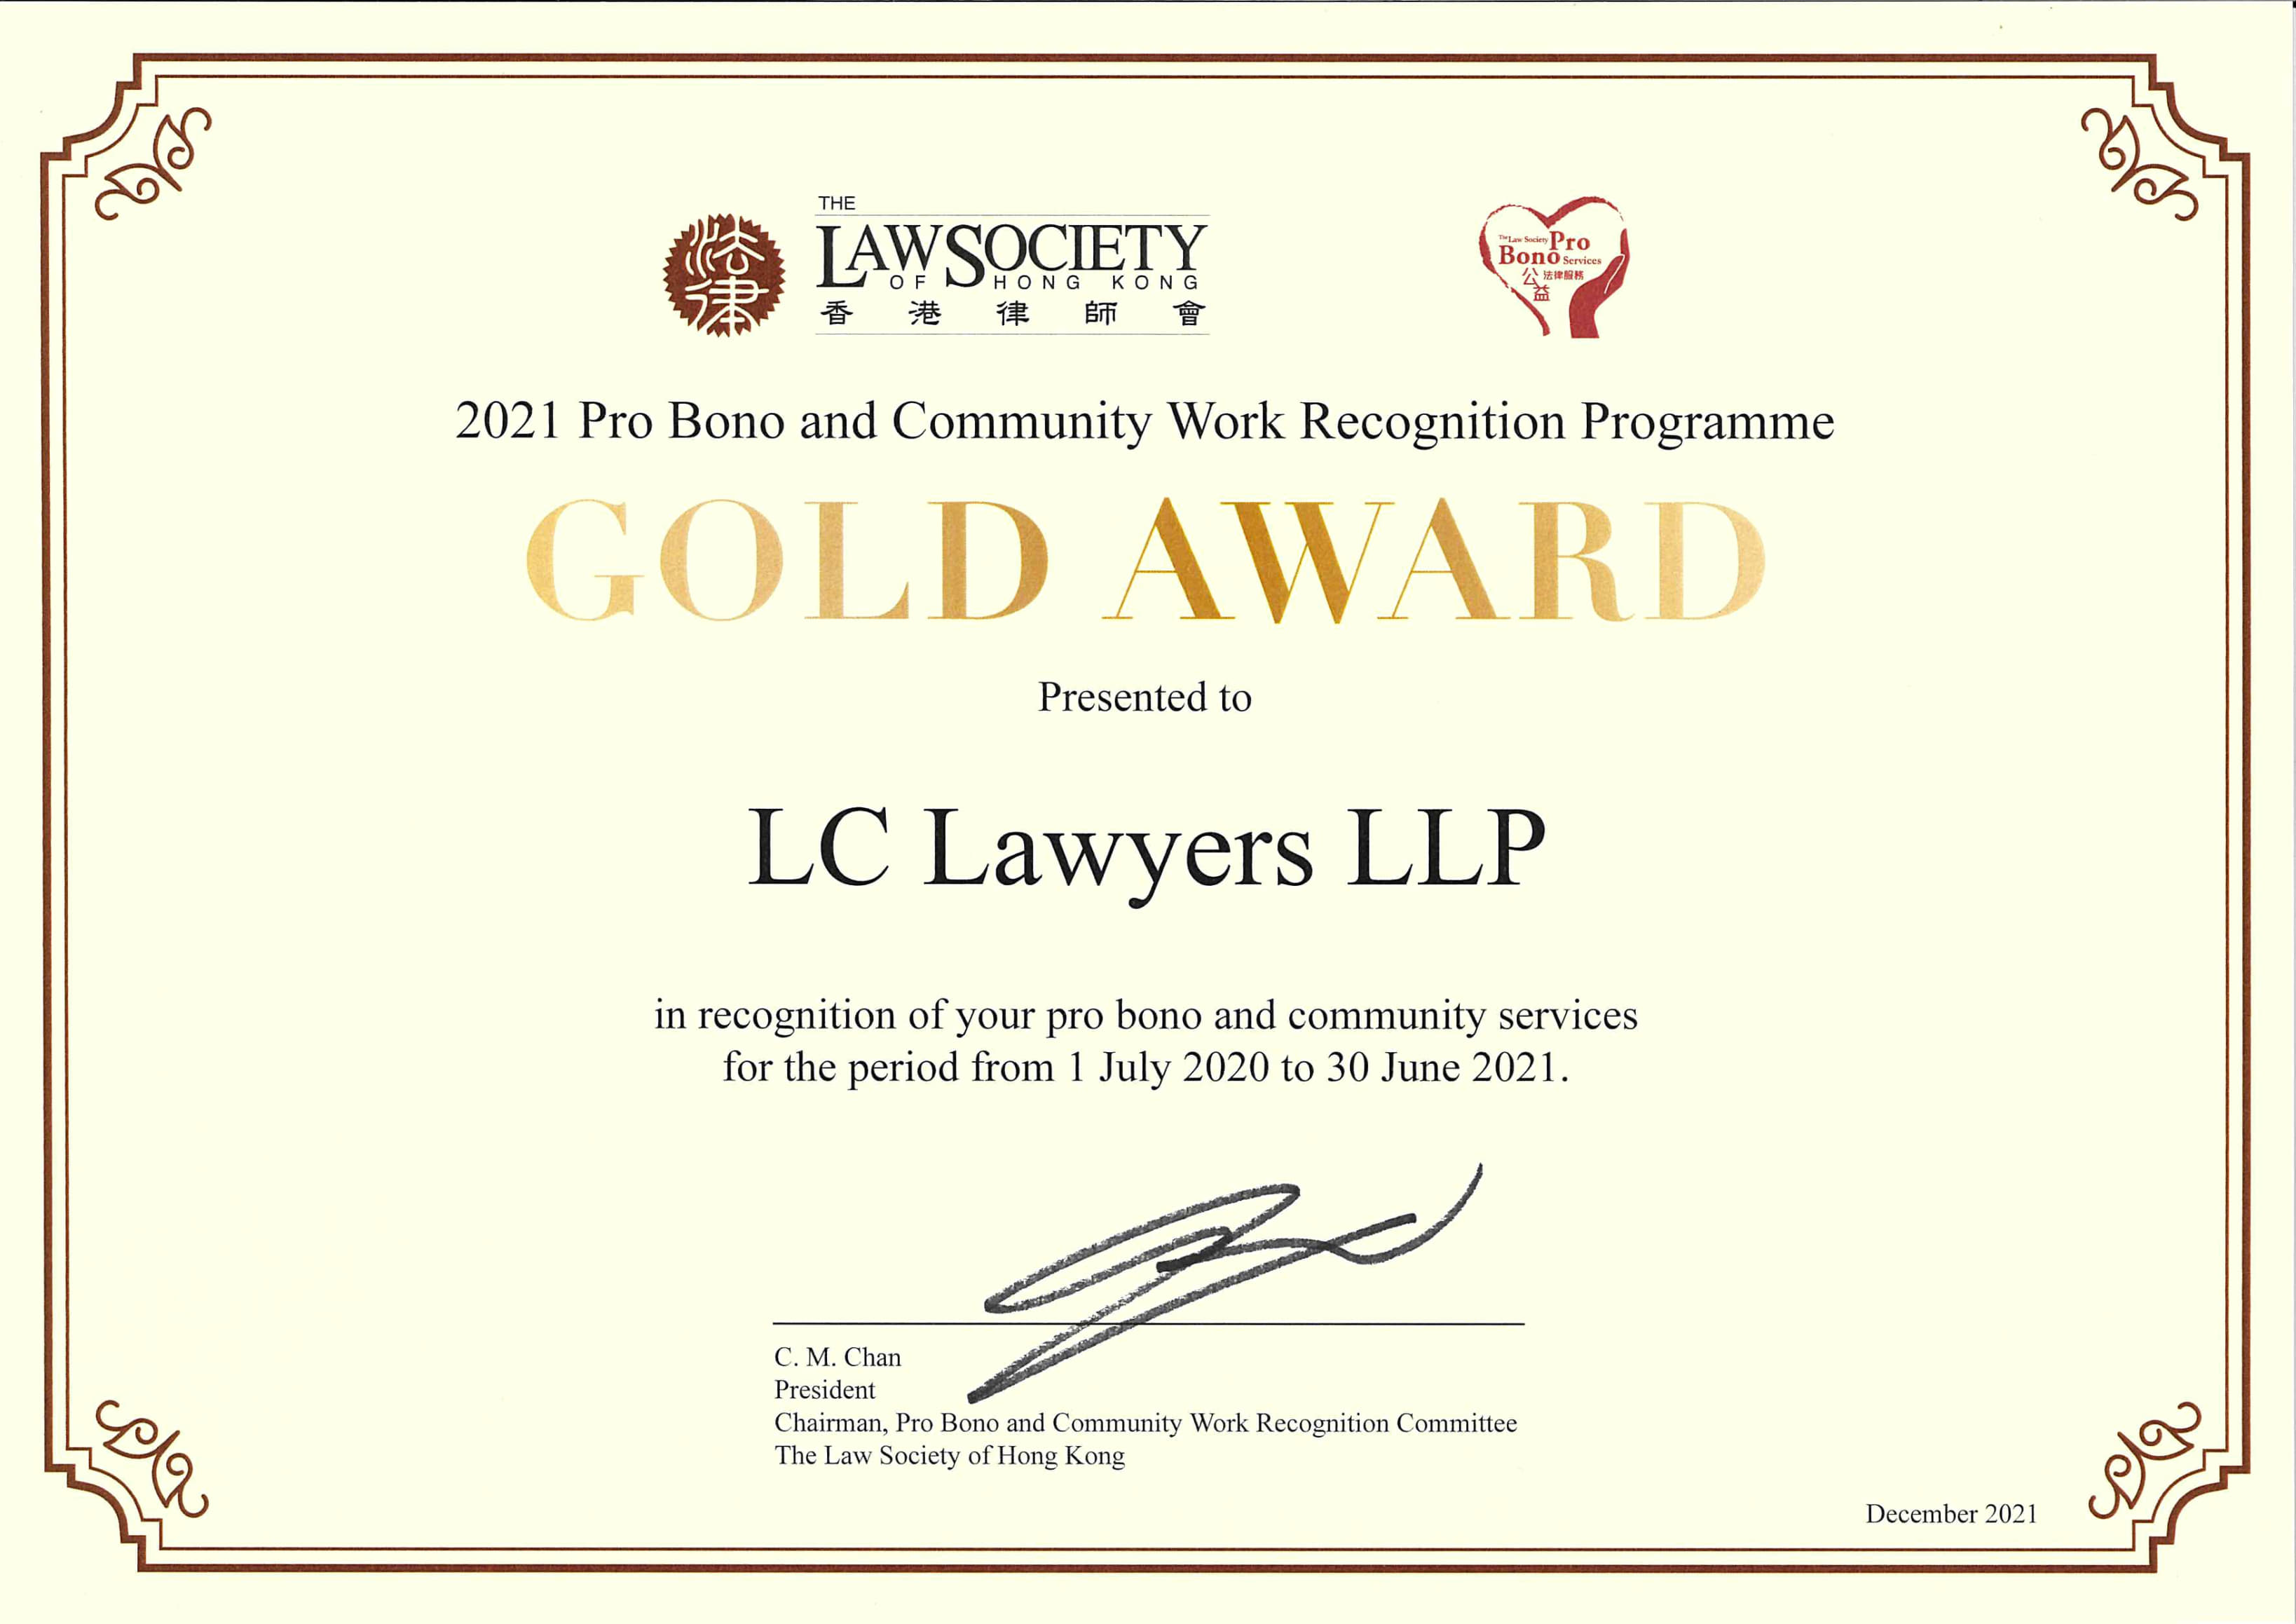 Gold Law Firm Award in Pro Bono Service by The Law Society of Hong Kong, 2021